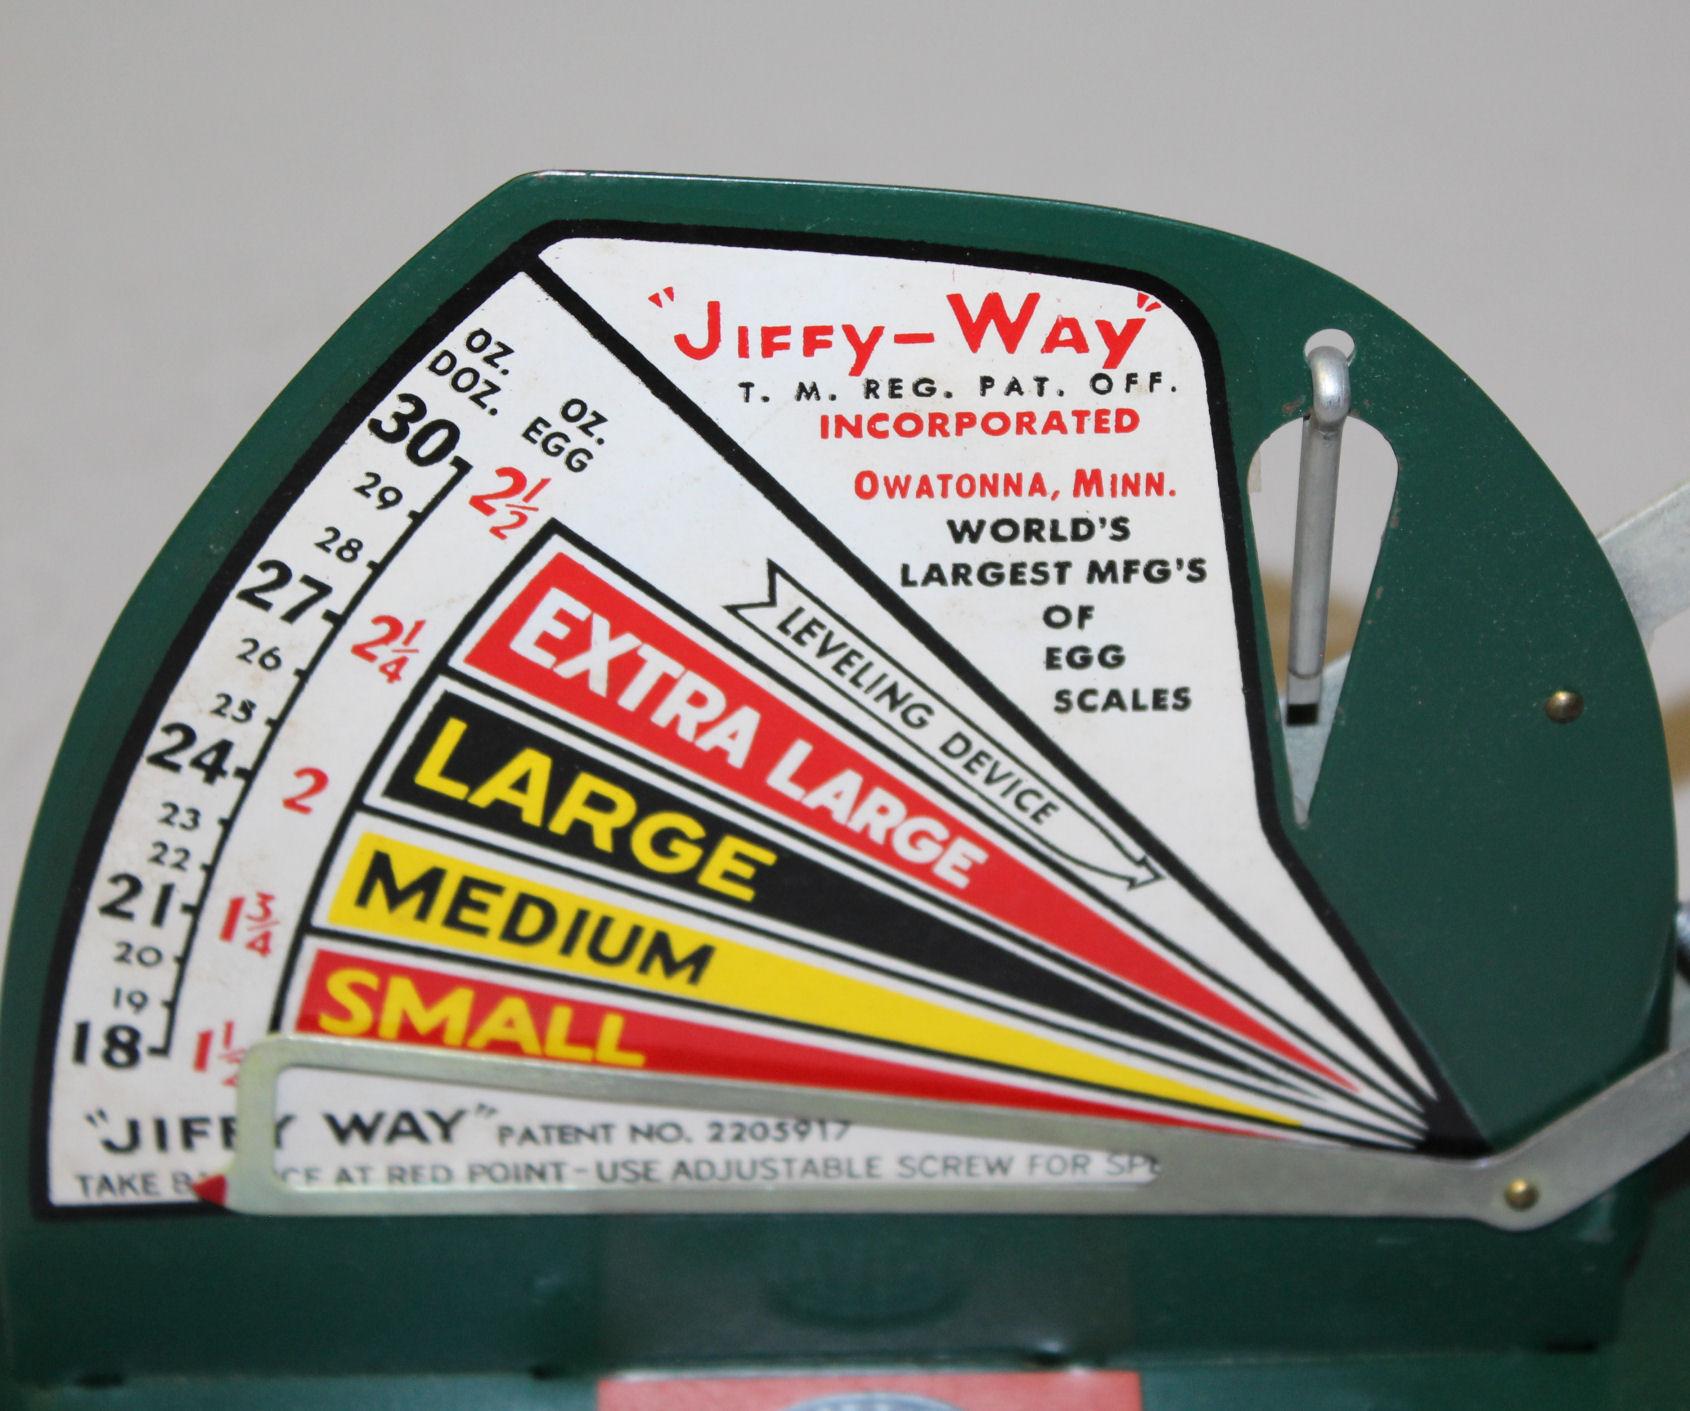 Sold at Auction: Vintage Jiffy-Way Metal Egg Scale Owatonna, Minnesota,  Green, Near Mint Condition